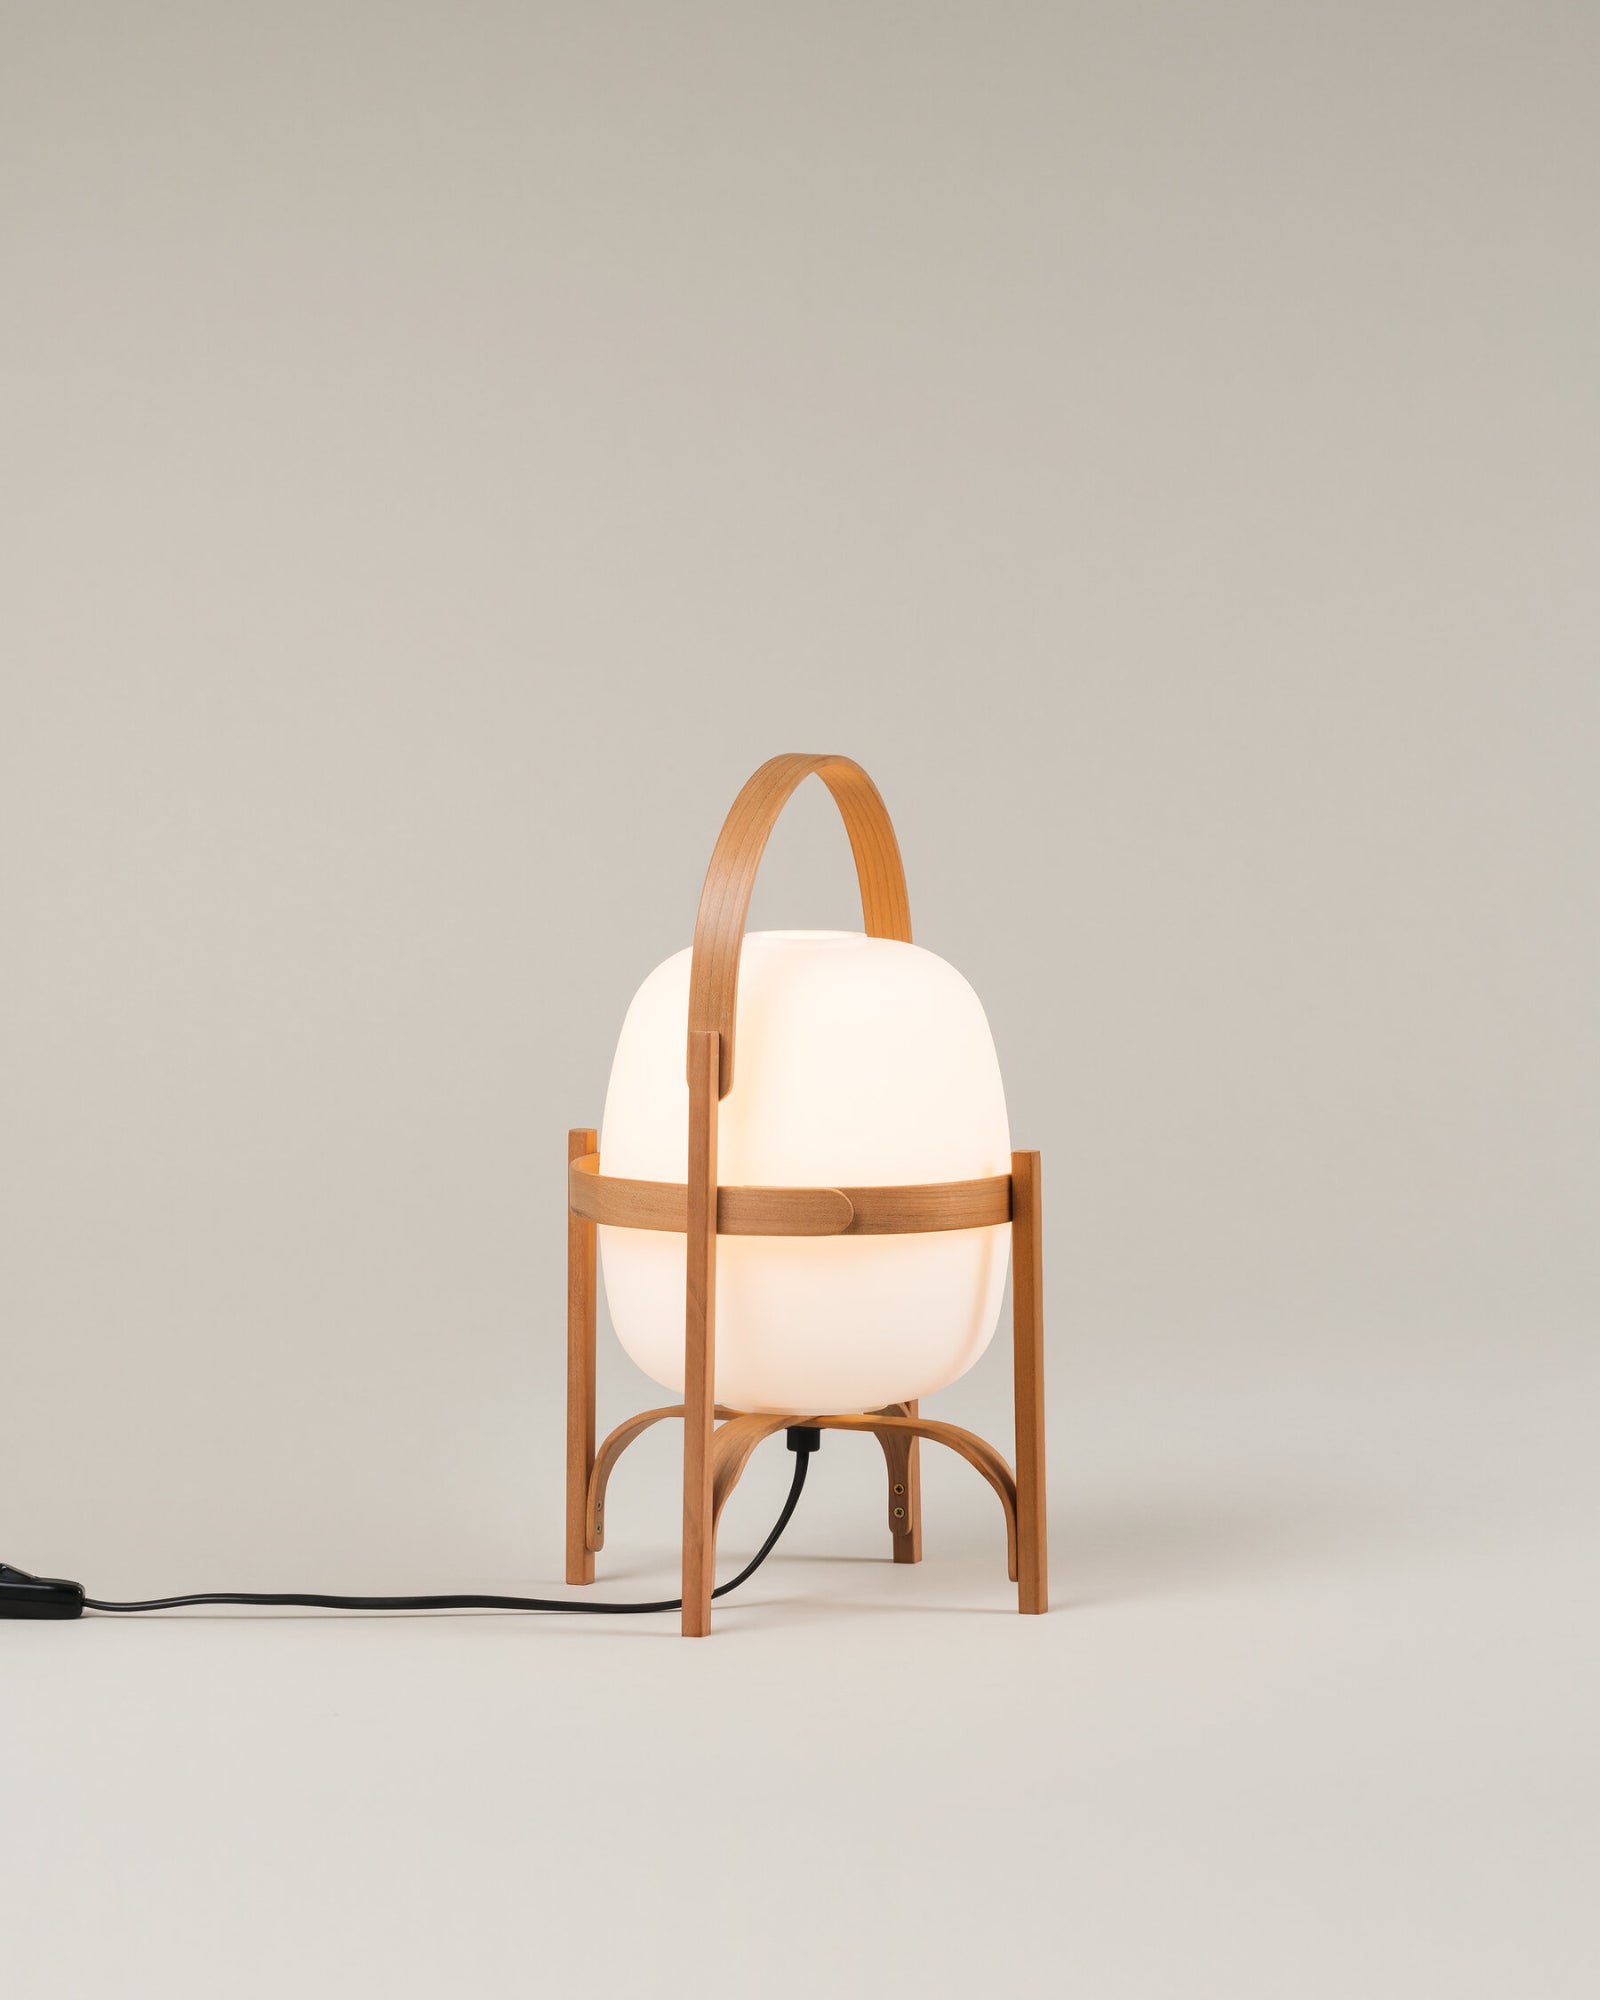 Contemporary table lamp called the Cestita Table Lamp in natural finish by Santa & Cole